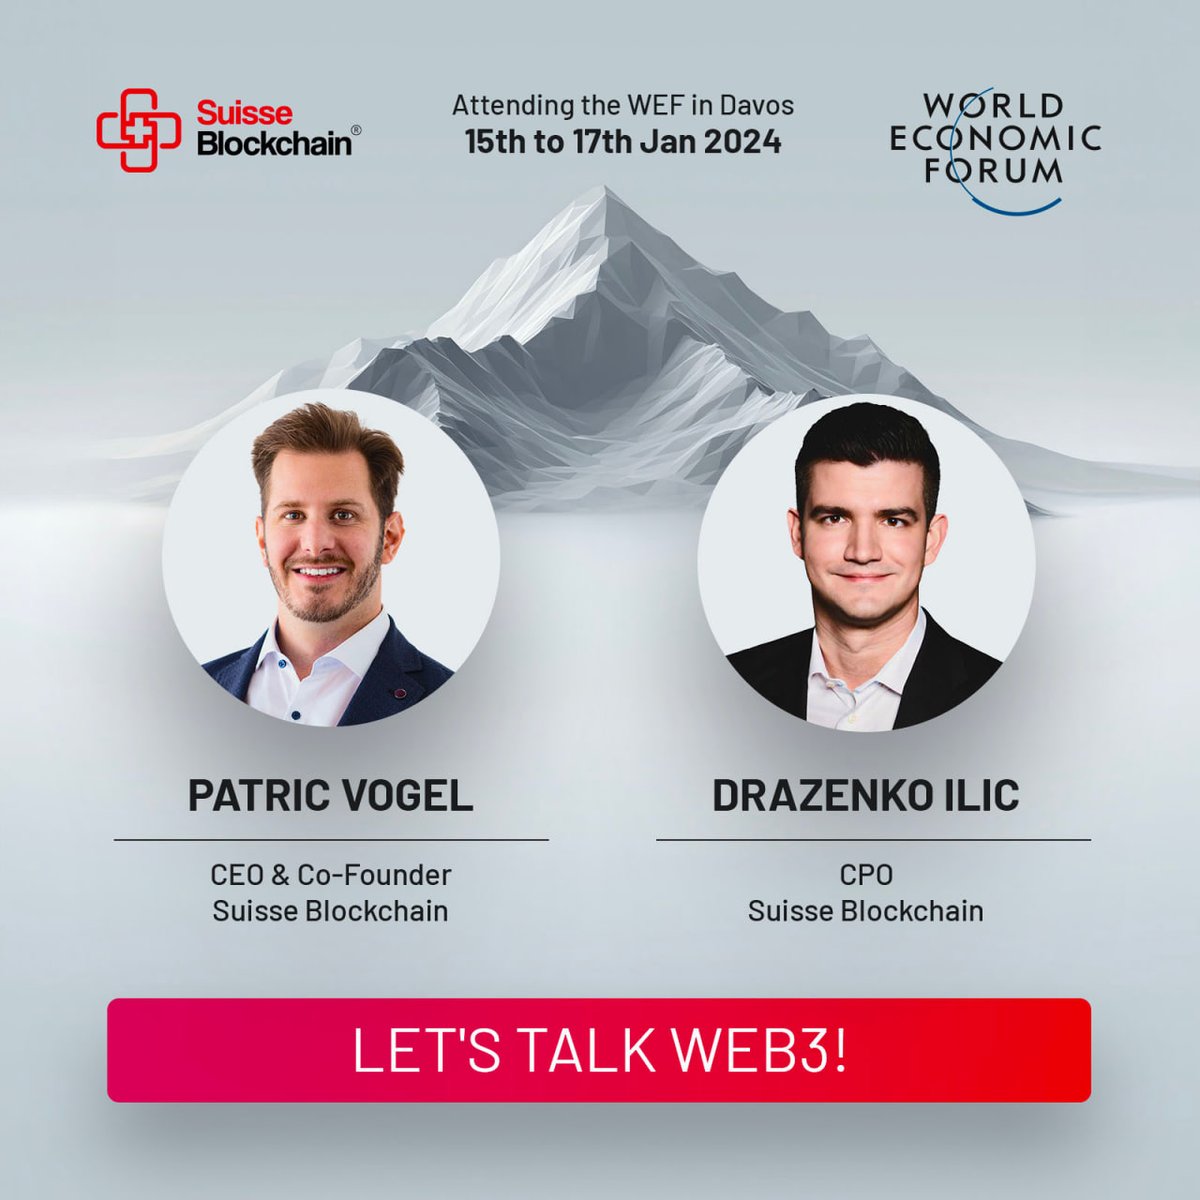 Suisse Blockchain at the World Economic Forum! 📅 Jan 15-17, 2024. Join us in Davos to discuss Web3 and the future of blockchain on the event floor. Be part of the conversation shaping global finance. #WEF2024 #SuisseBlockchain #BlockchainInnovation #Web3